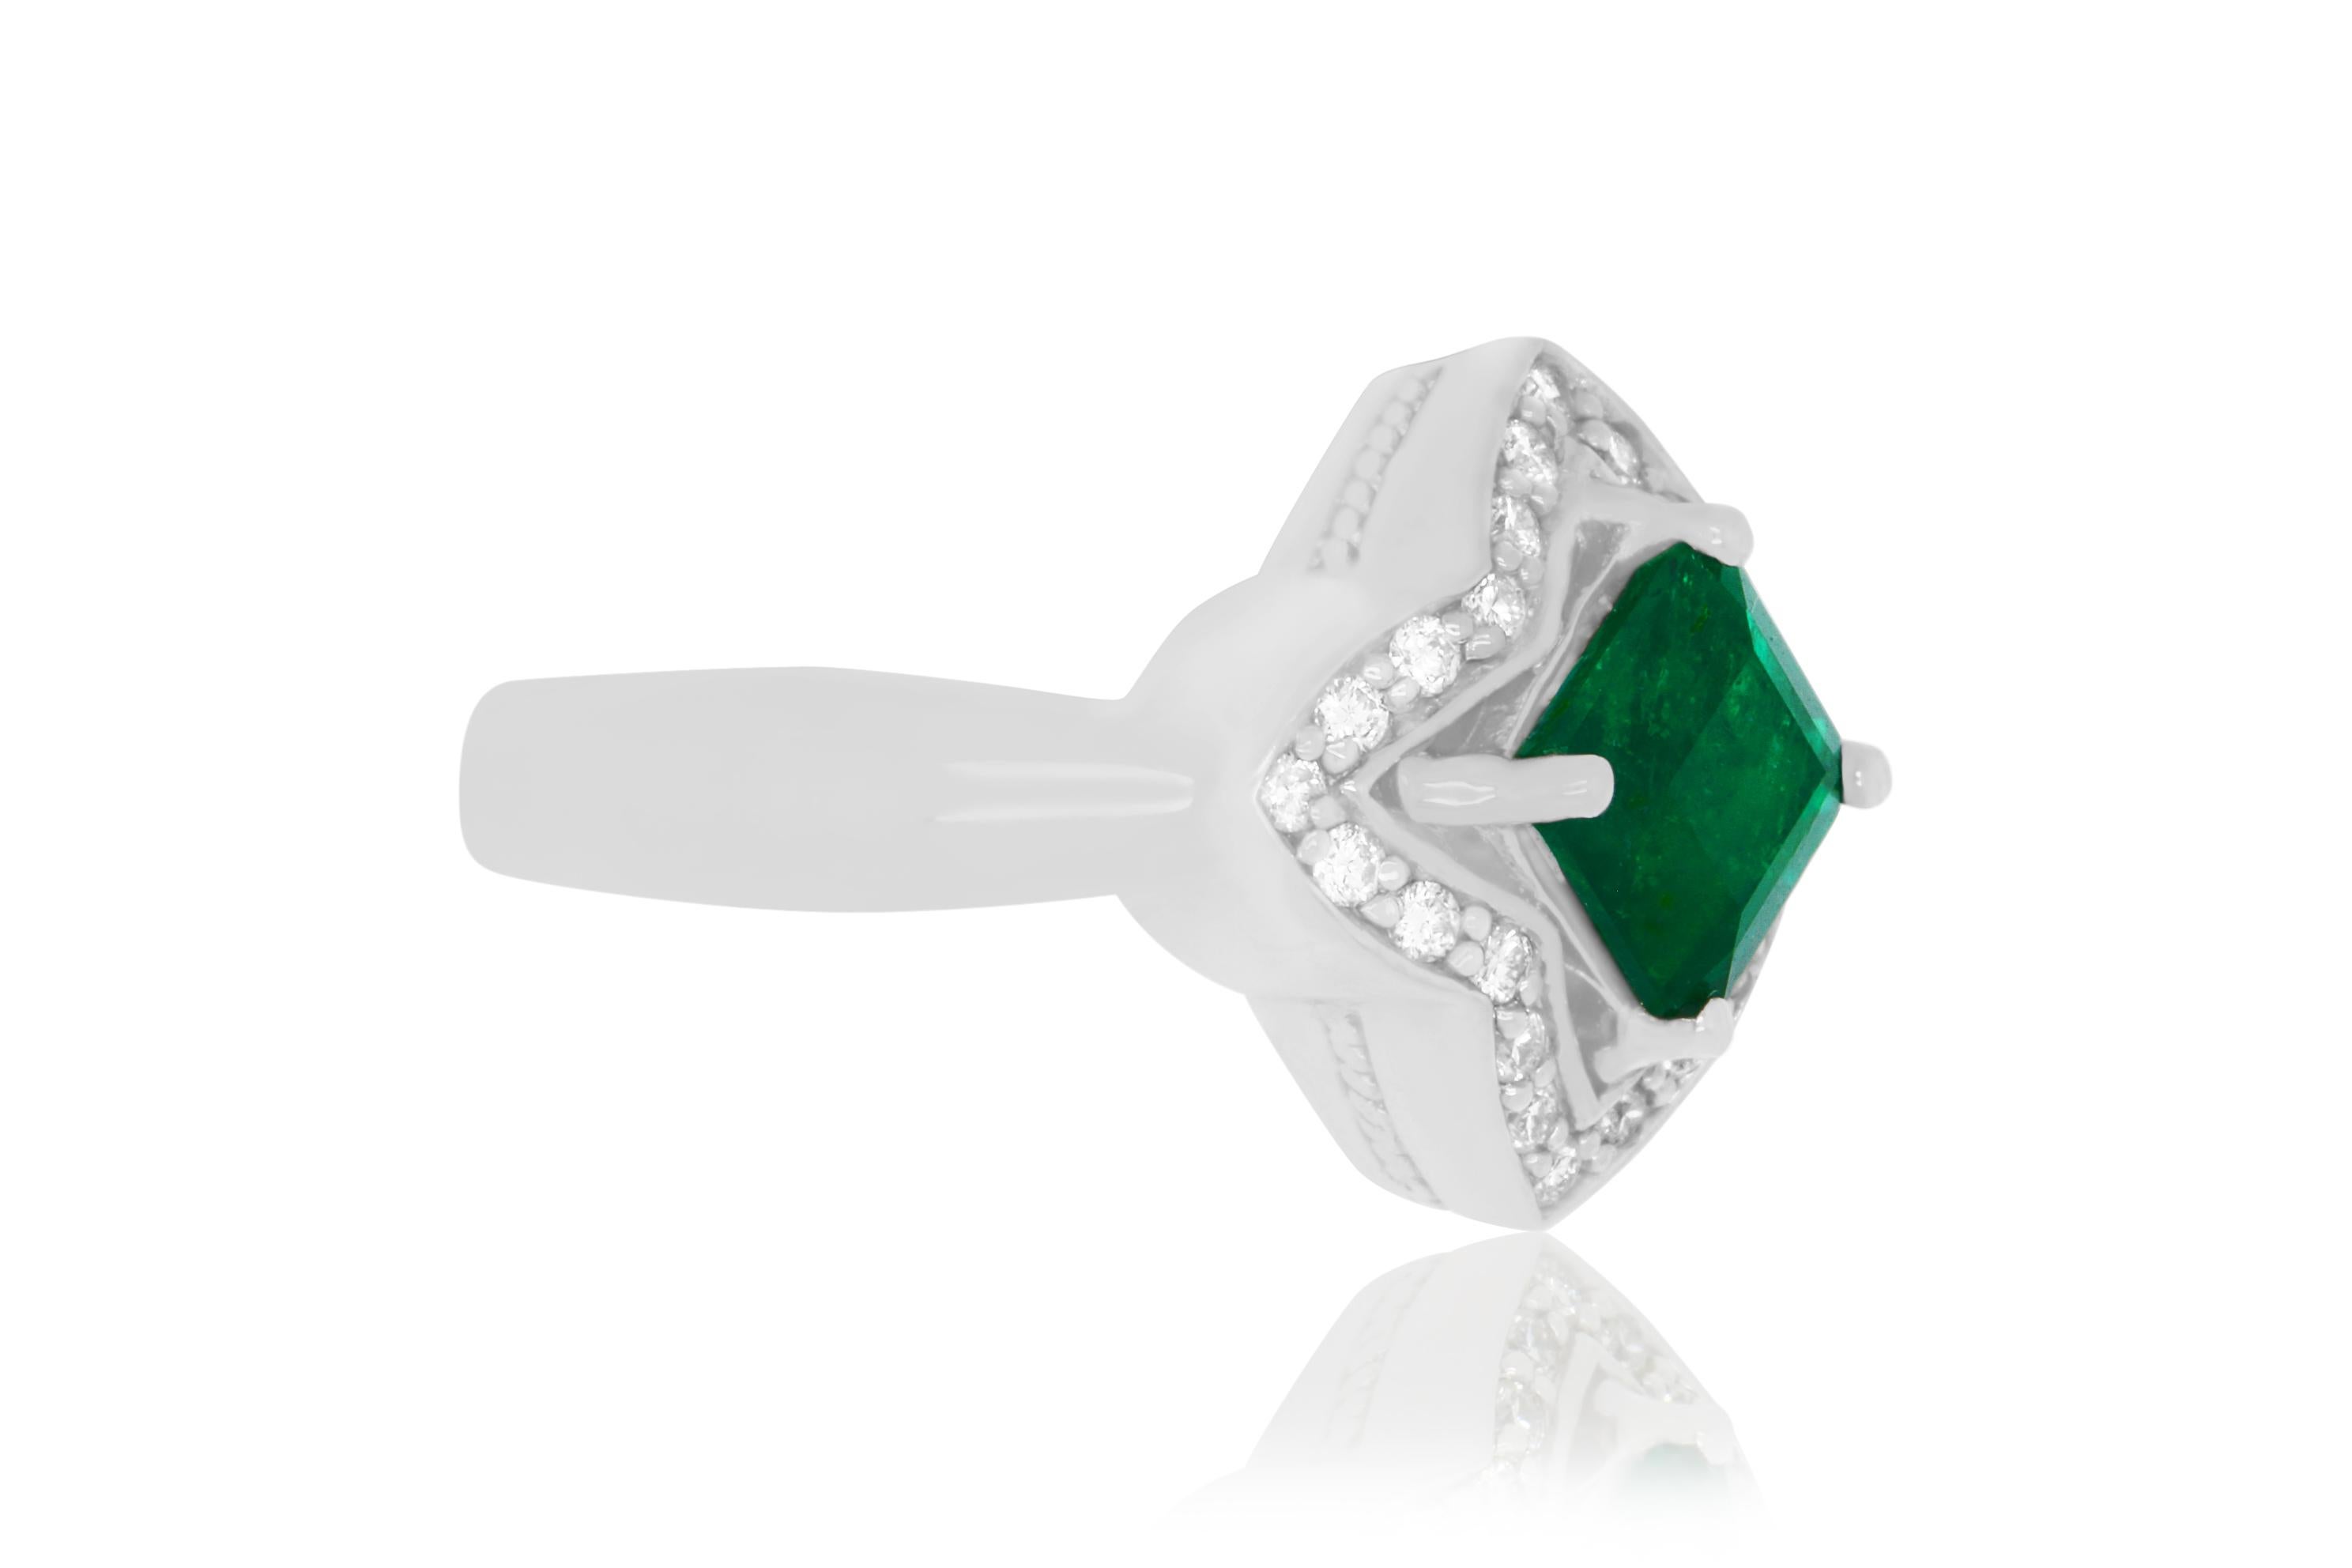 A stunning Cushion Cut Emerald encased in 14K white gold and 0.29 Carats of Brilliant Round White Diamonds. A stunning, classic look for all occasions!

Material: 14k White Gold 
Center Stone Details: 1 Cushion Cut Emerald at 1.40 Carats 
Mounting